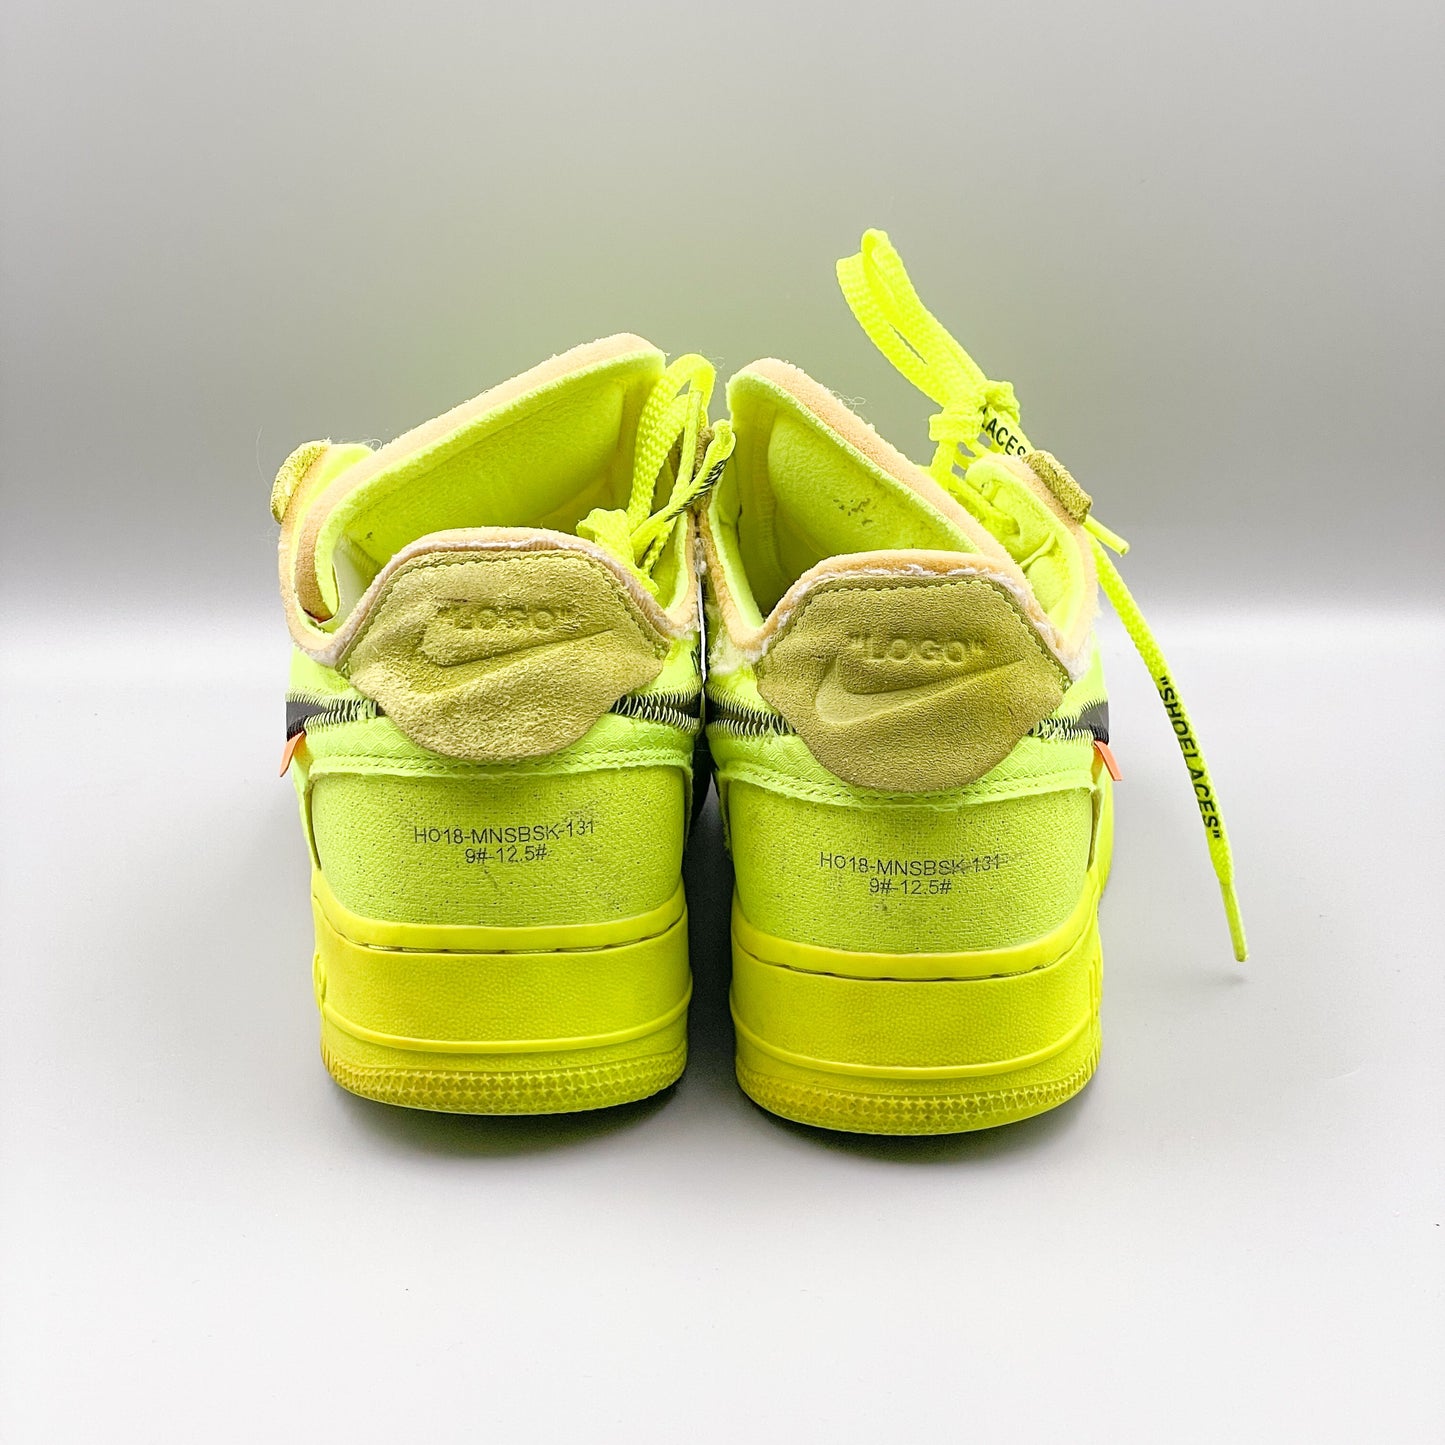 Nike Air Force 1 Low Off-White Volt Size 9